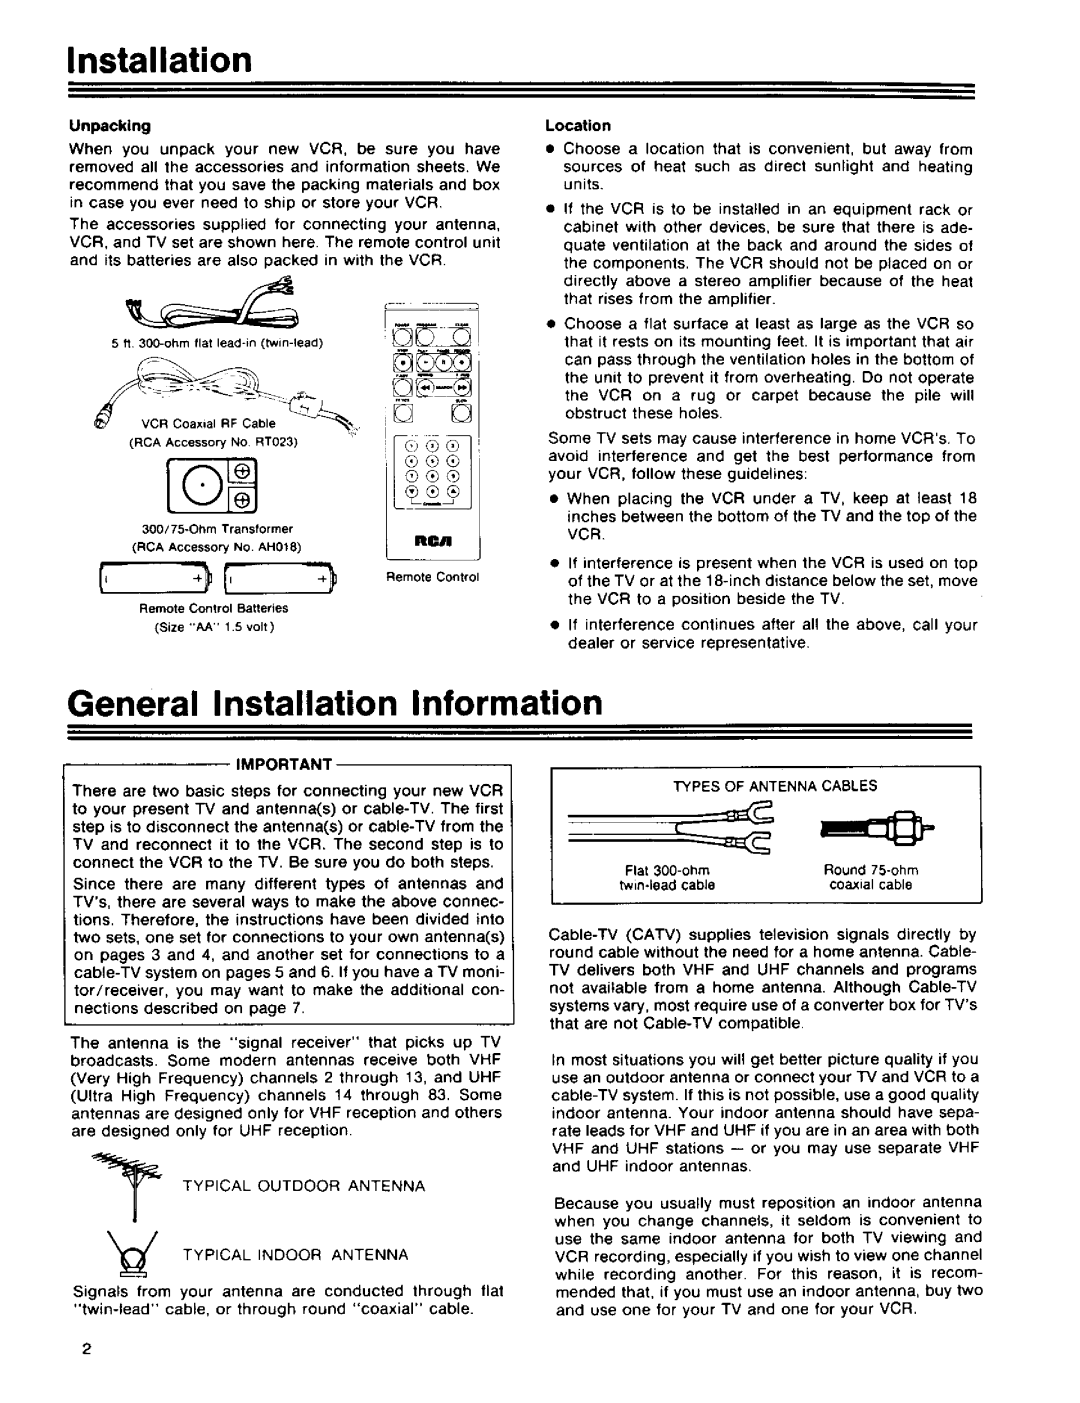 RCA 390 owner manual General Installation Information 